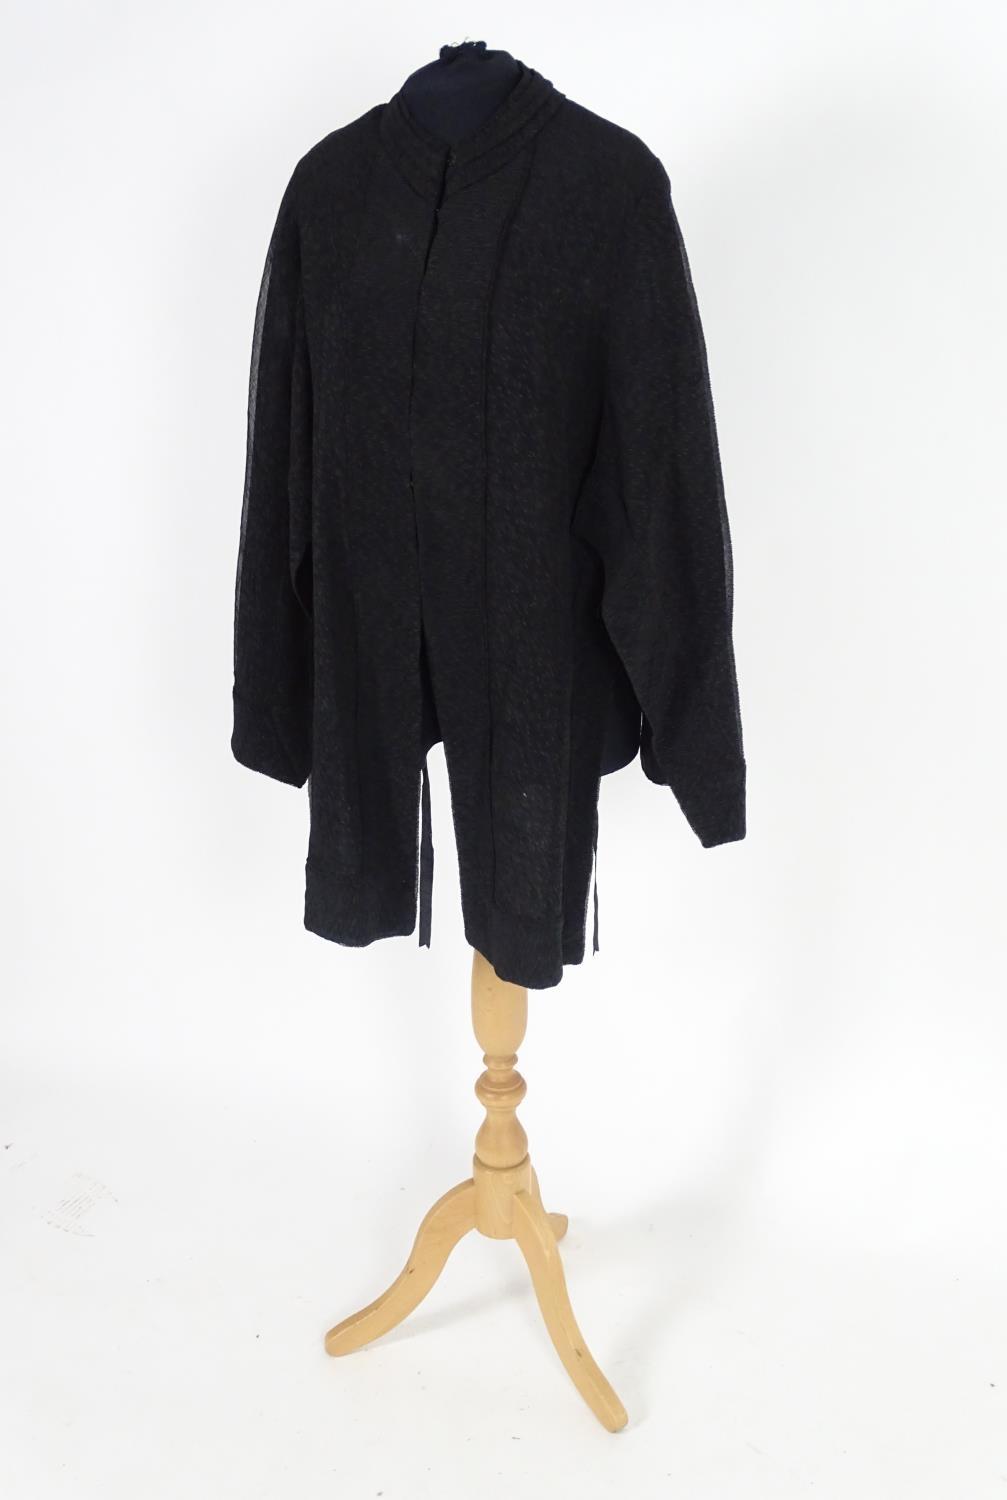 A bespoke vintage black crepe cape, Ladies size small approx. Please Note - we do not make reference - Image 4 of 7